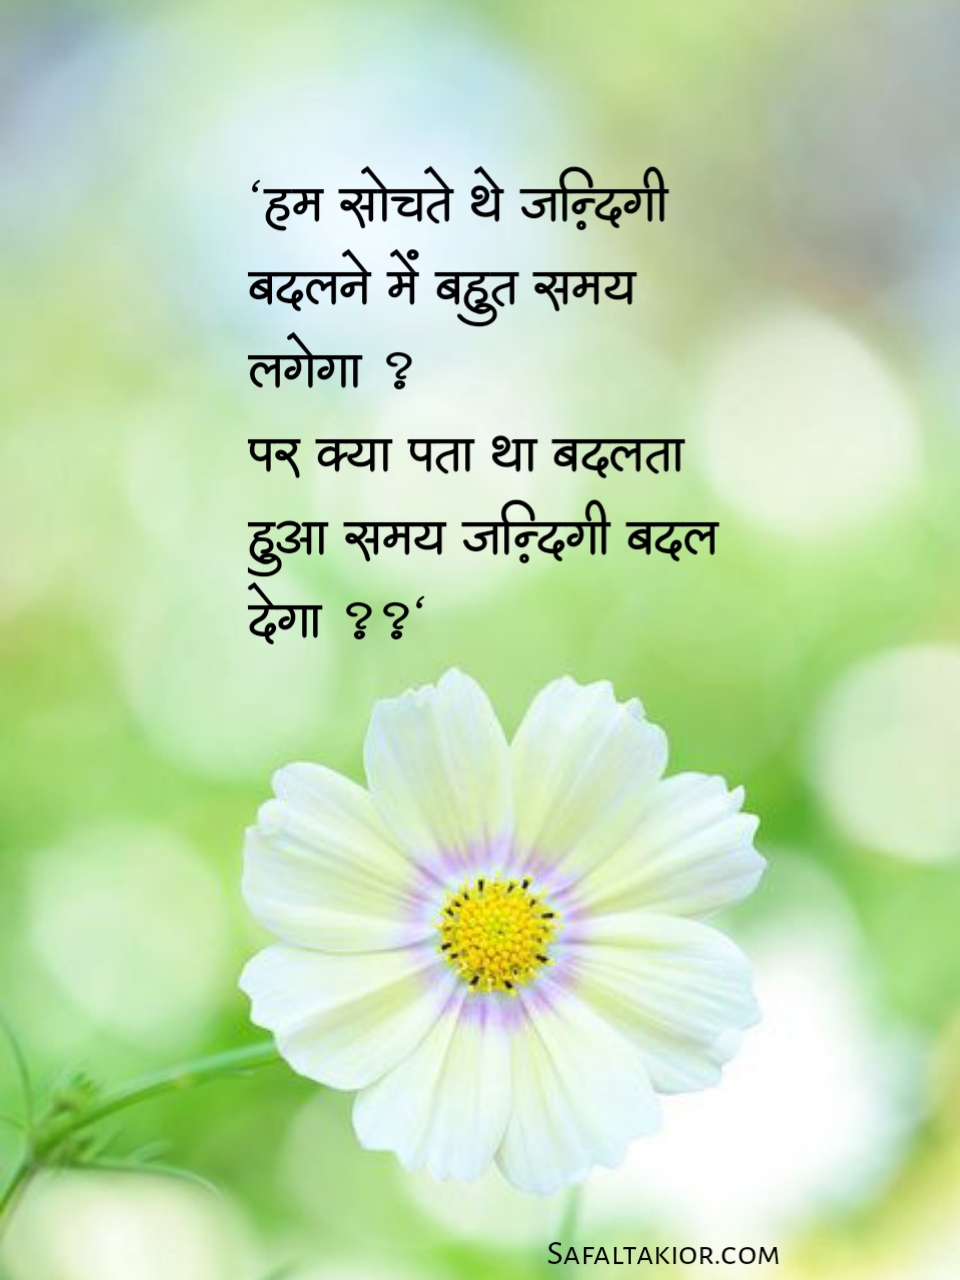  Life Quote on Humanity in Hindi